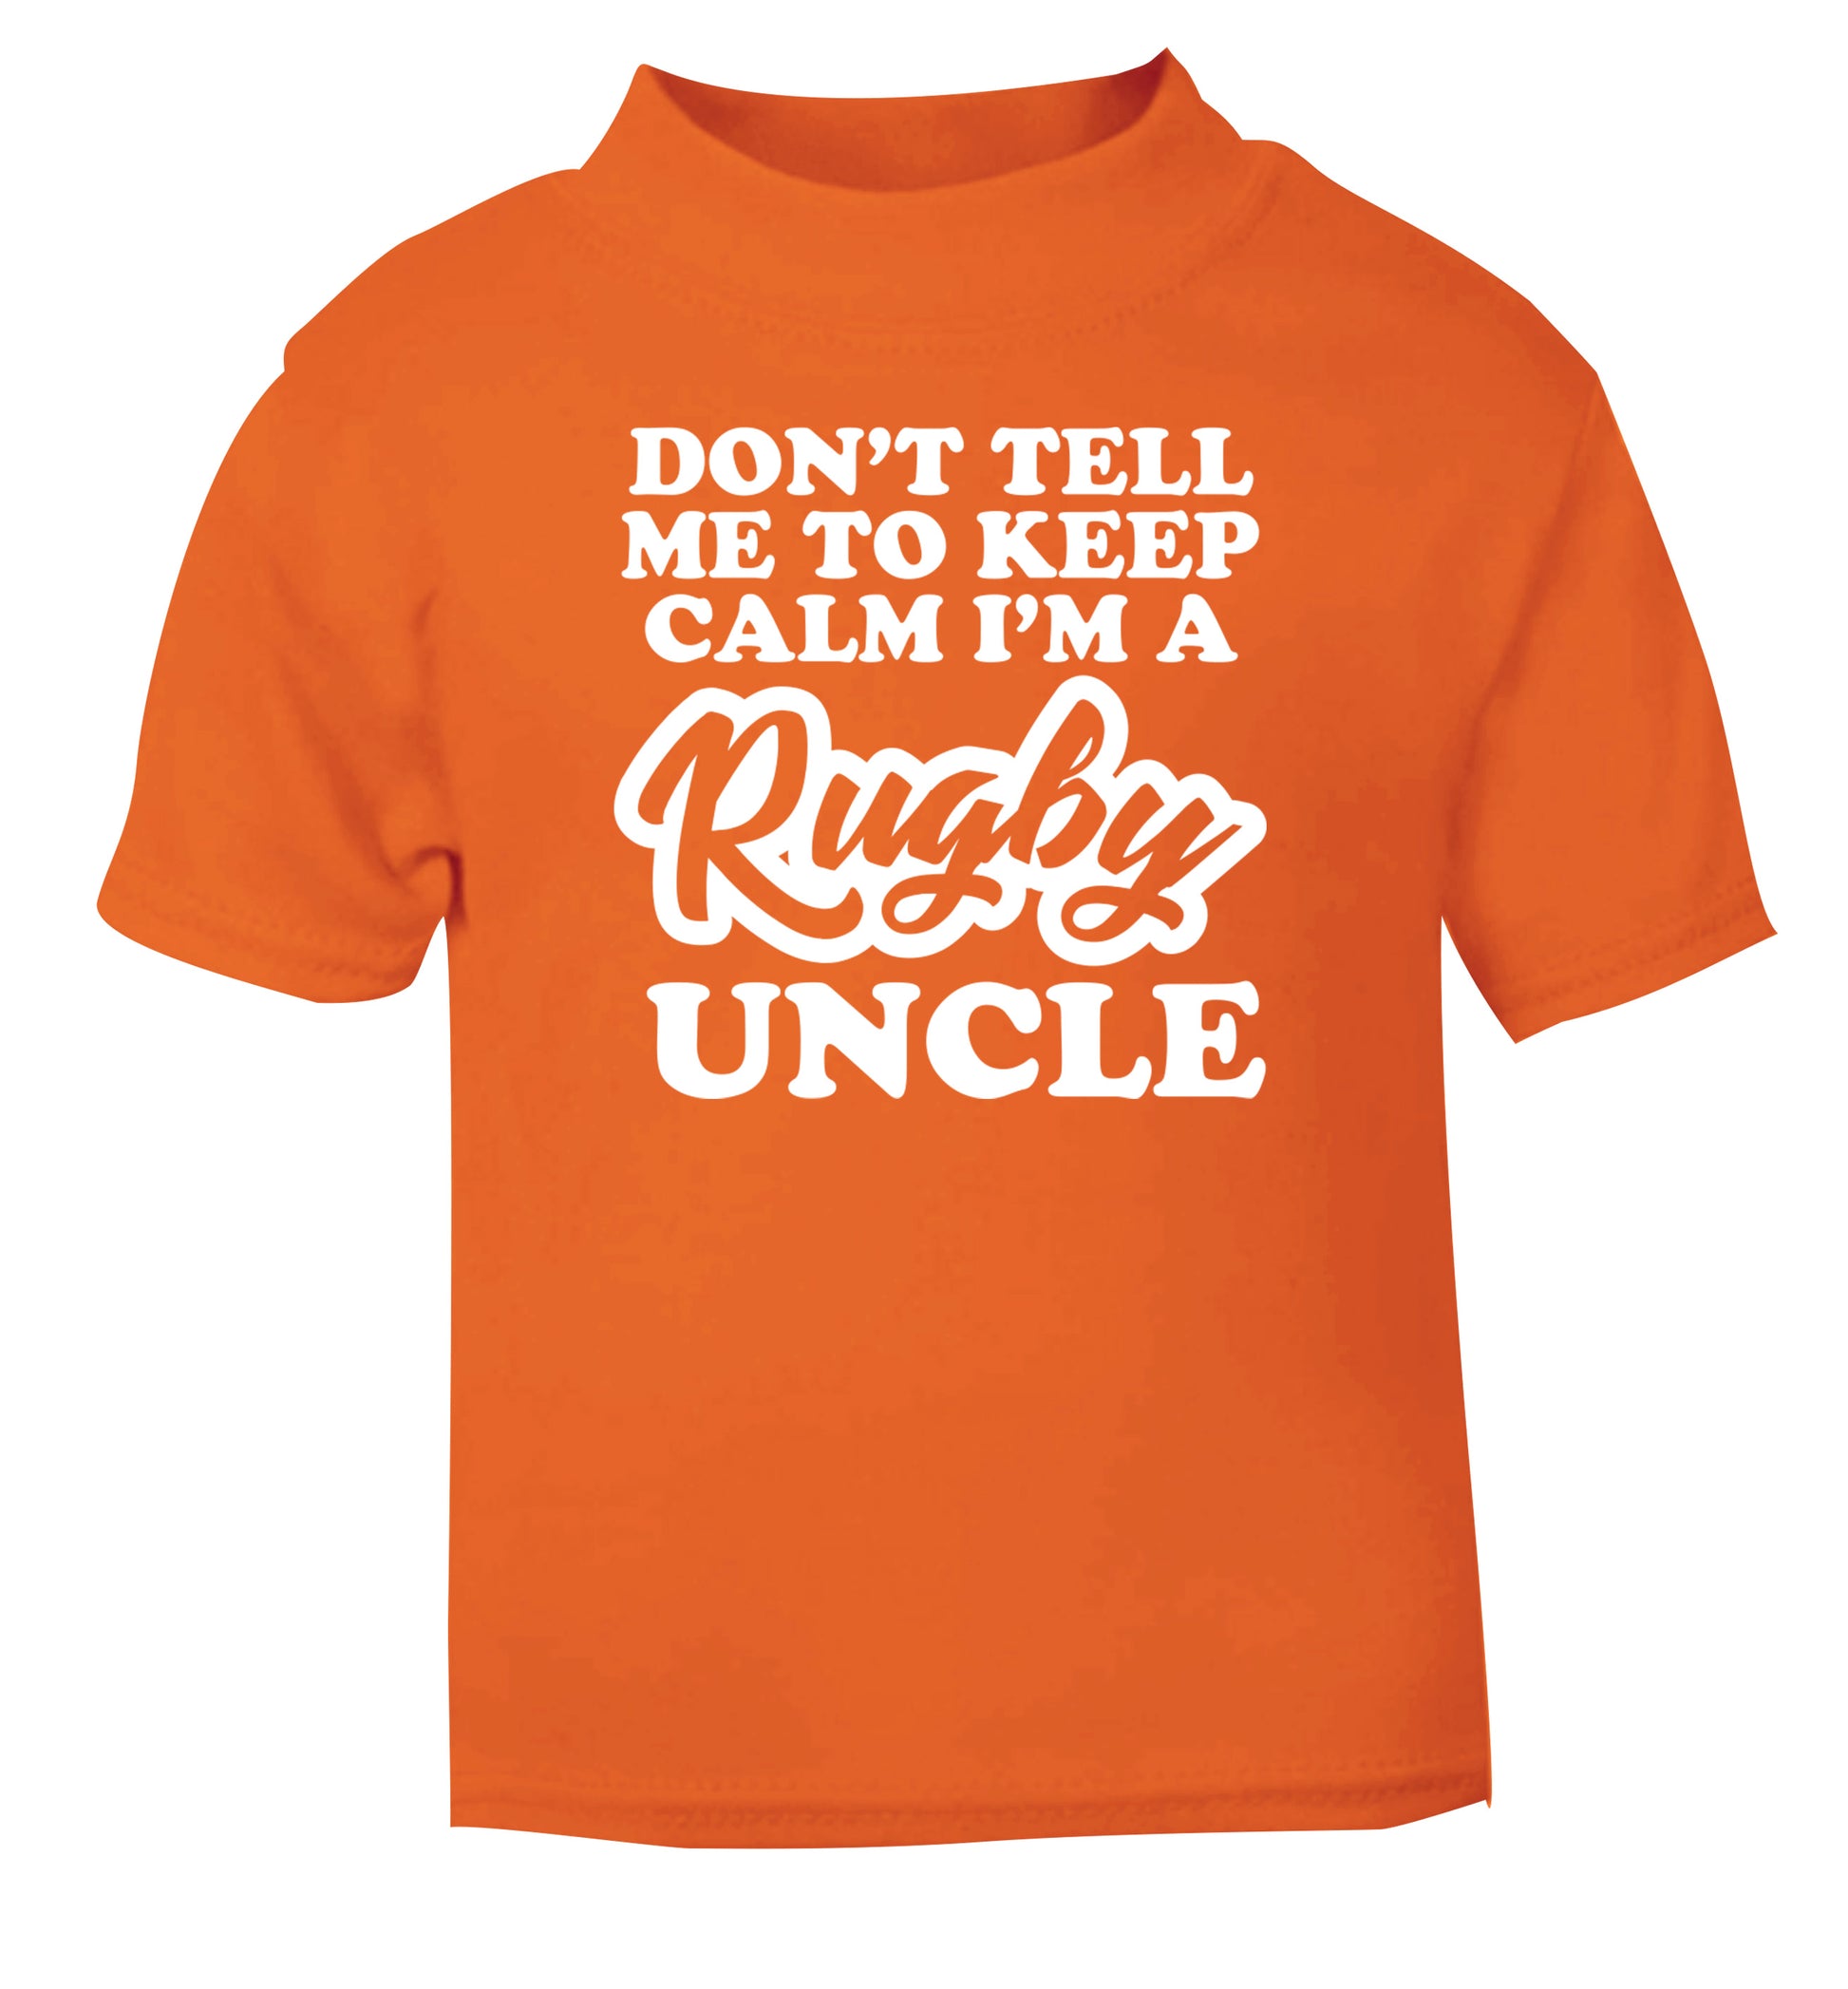 Don't tell me to keep calm I'm a rugby uncle orange Baby Toddler Tshirt 2 Years